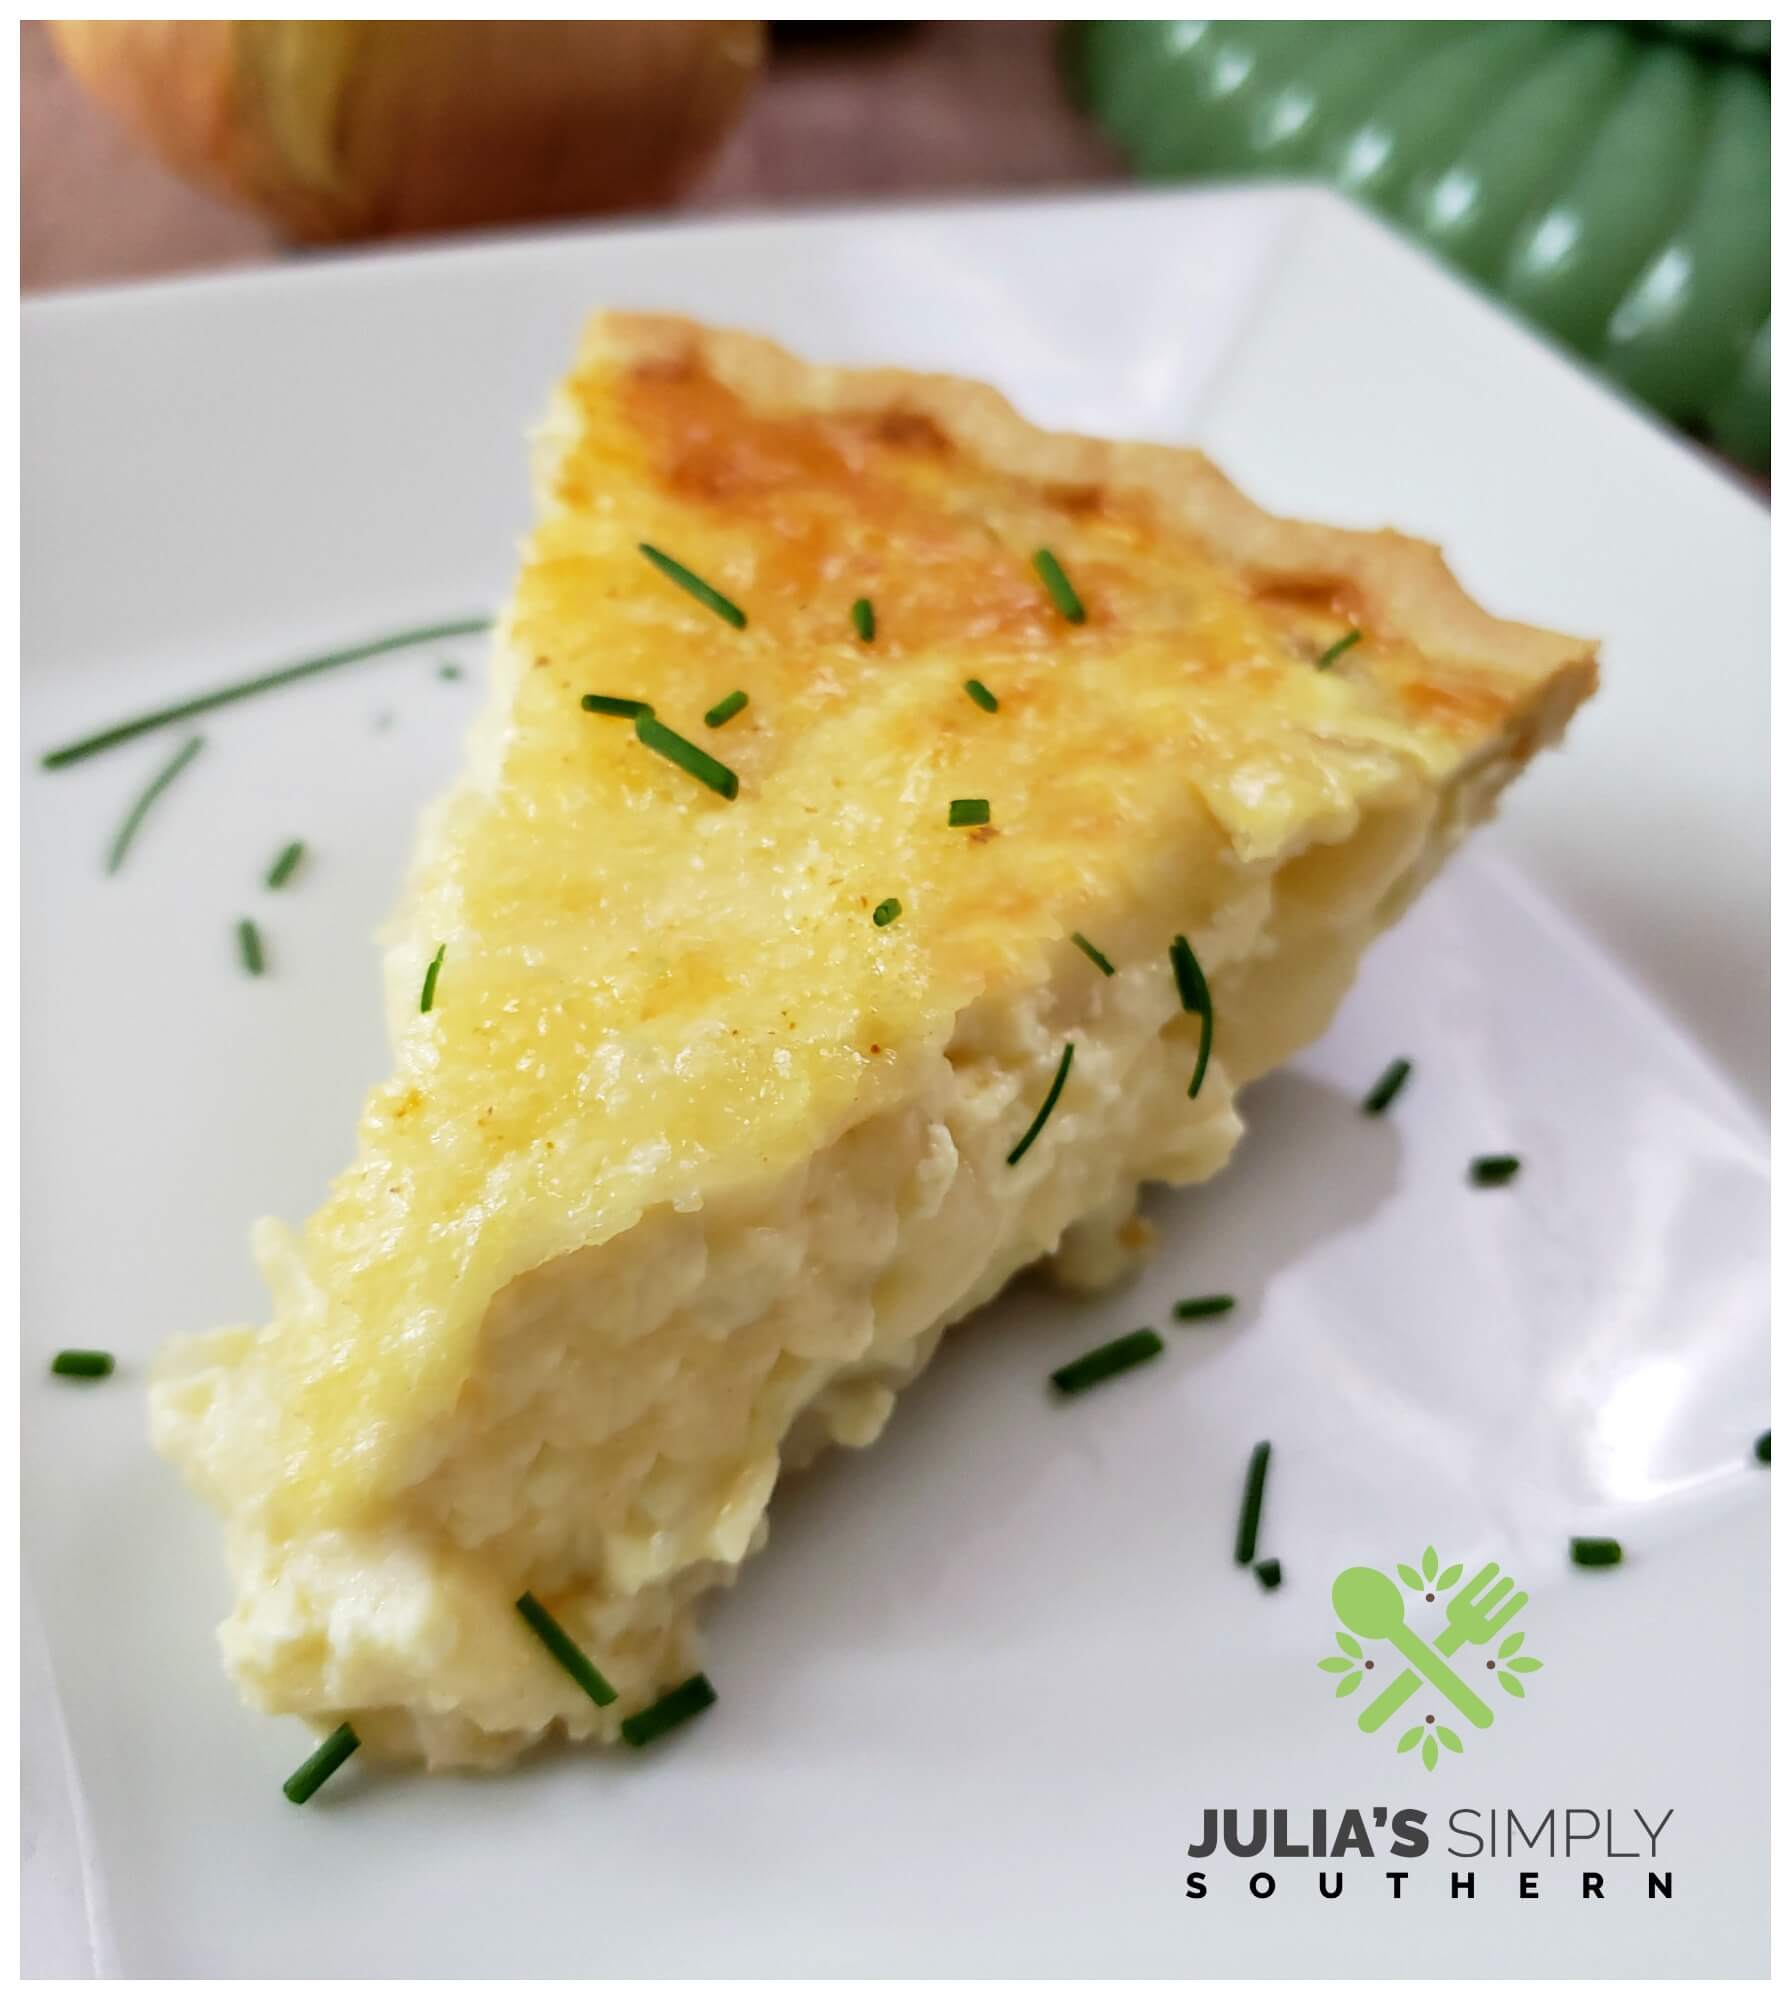 Creamy onion pie (quiche) made with Vidalia onions from Georgia and Swiss cheese on a white square plate.